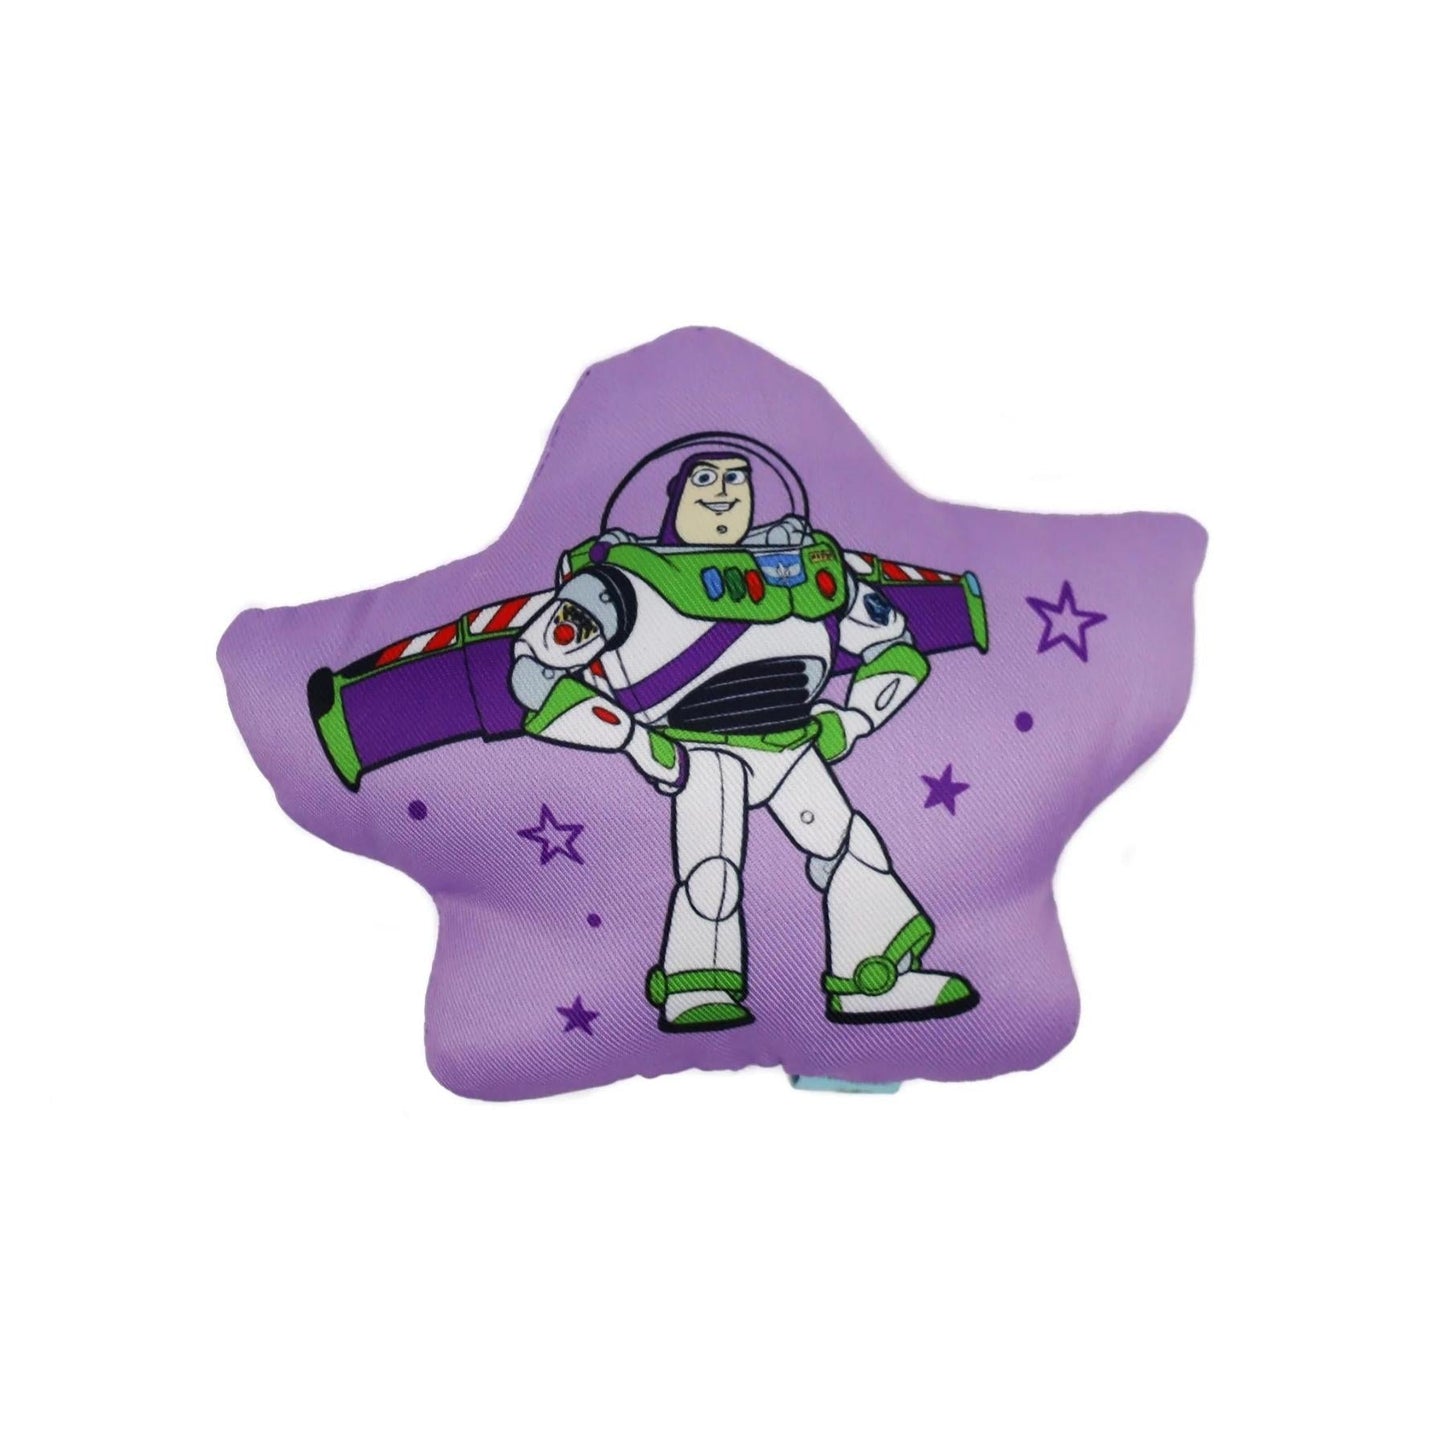 Toy Story - Buzz Lightyear Squeaky Toy - Pooch Luxury